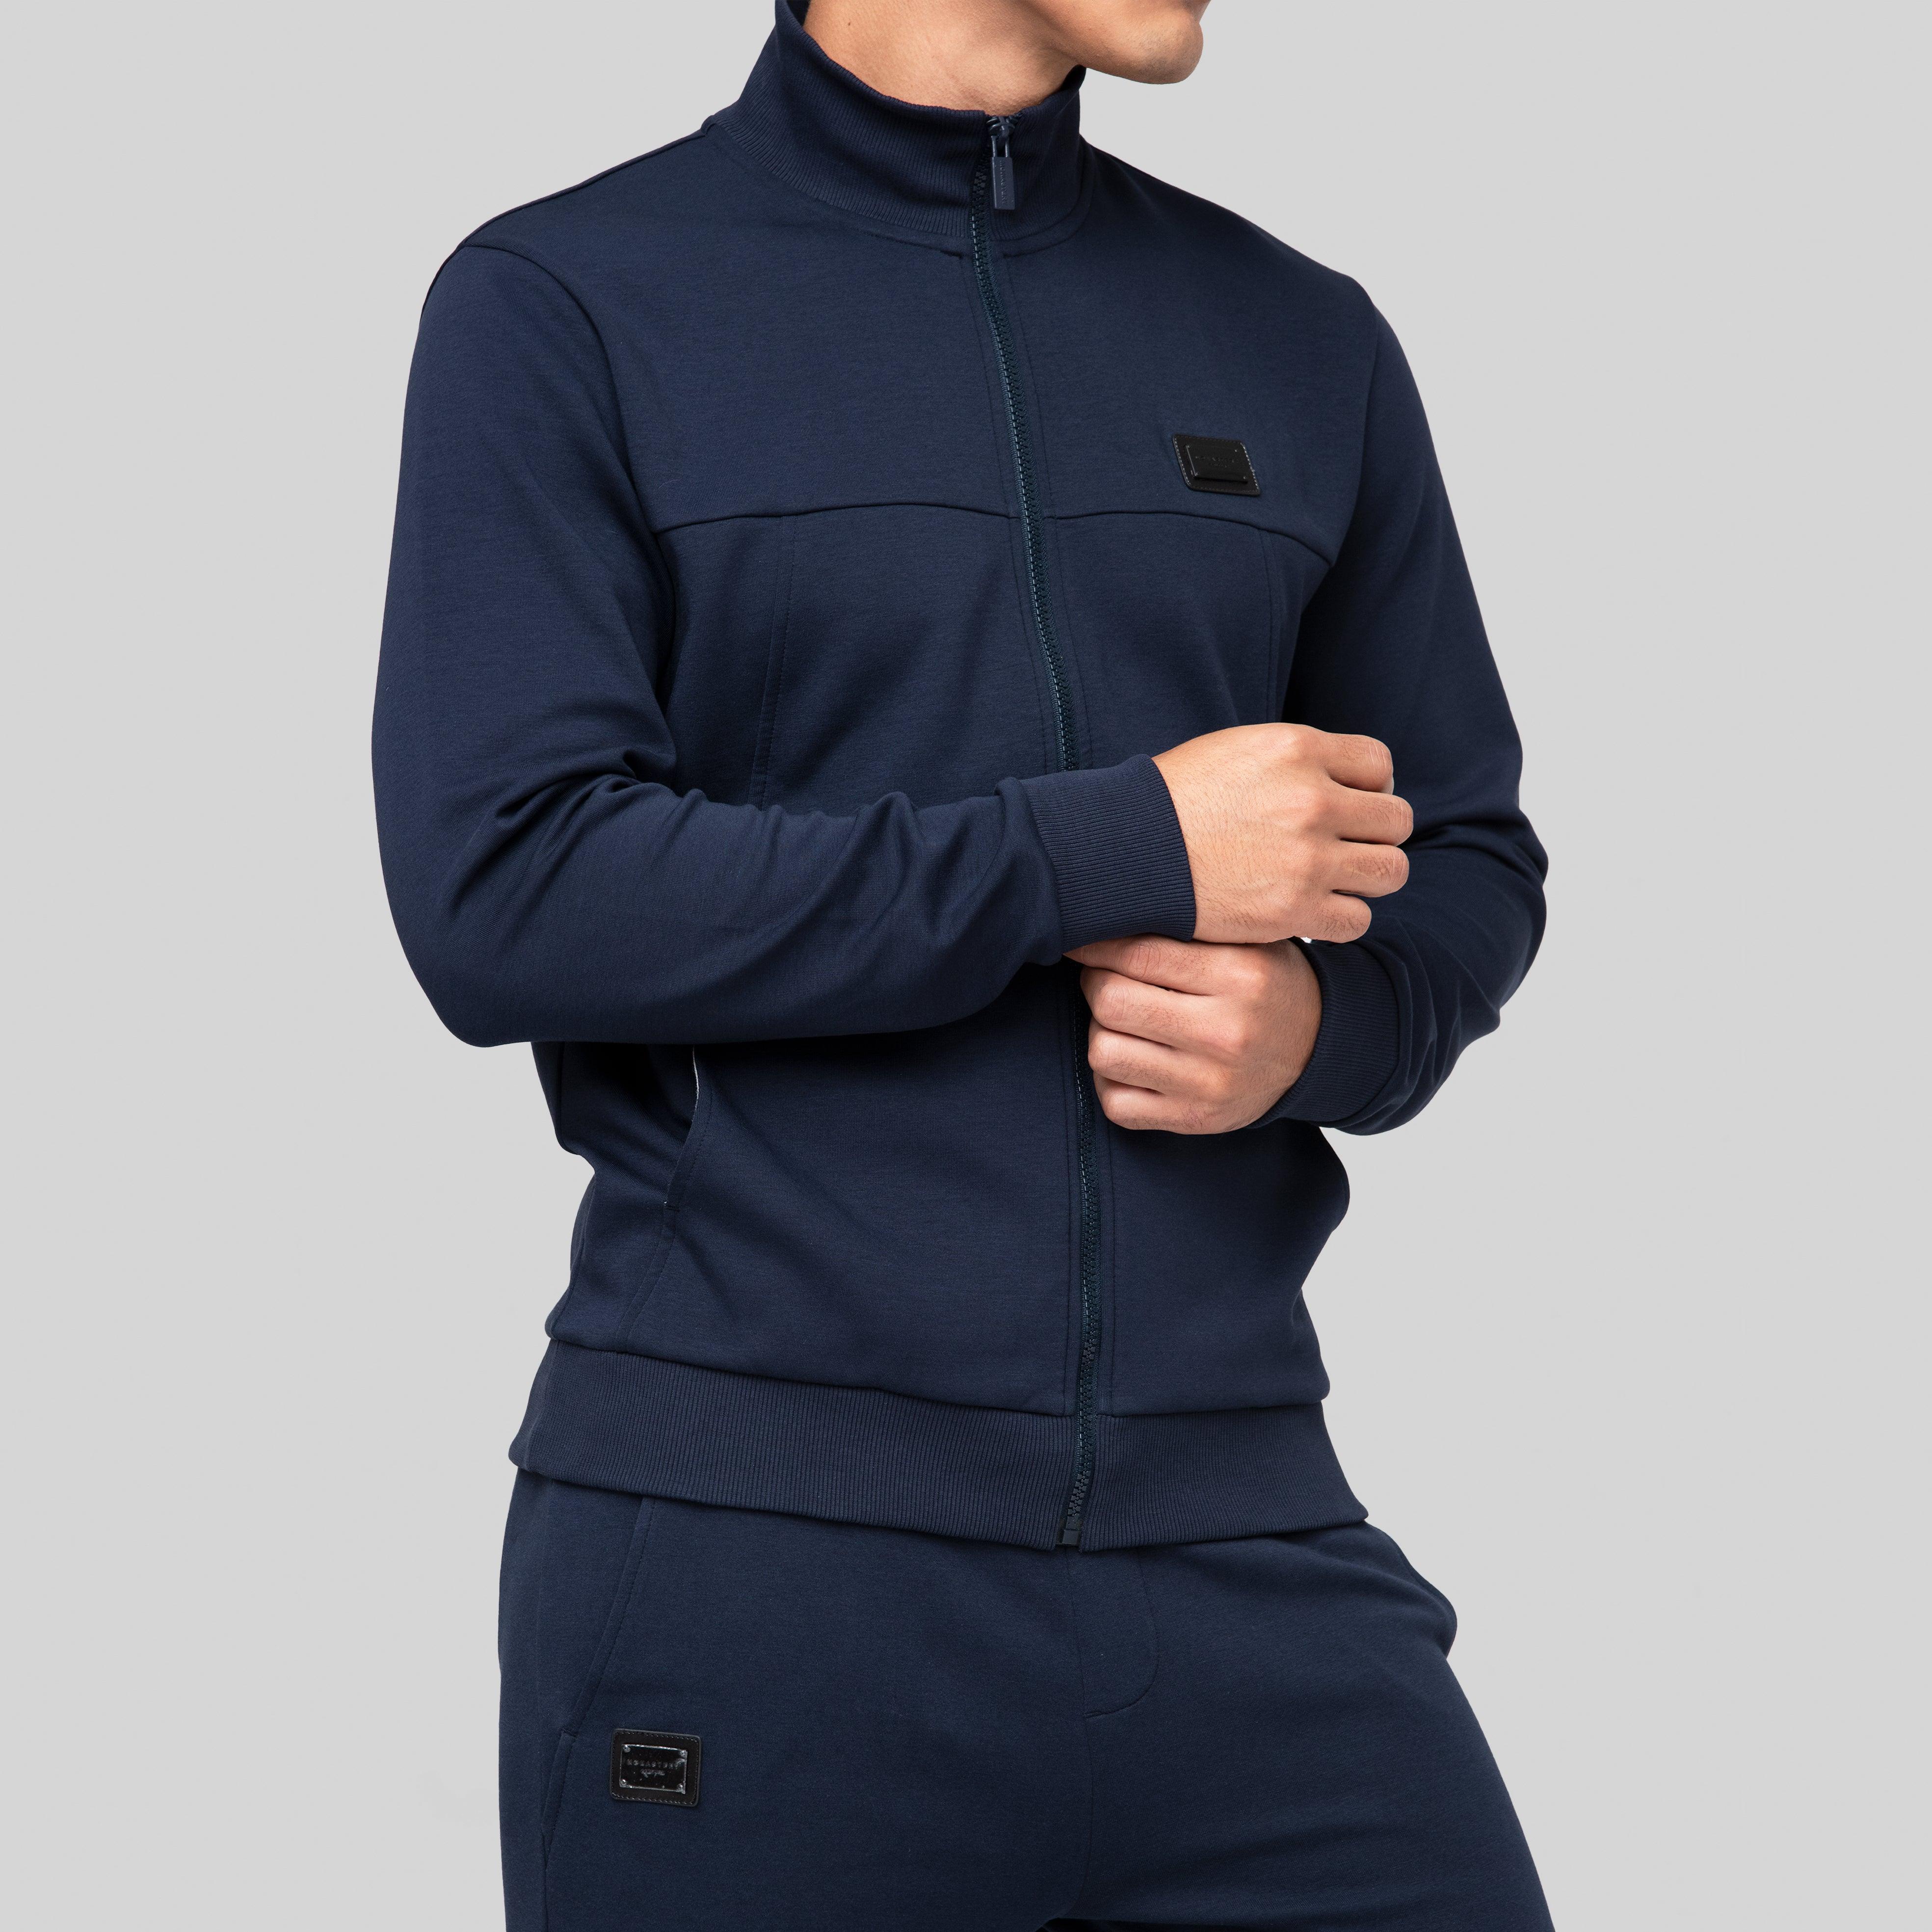 CIRCINUS NAVY BLUE TRACKSUIT | Monastery Couture